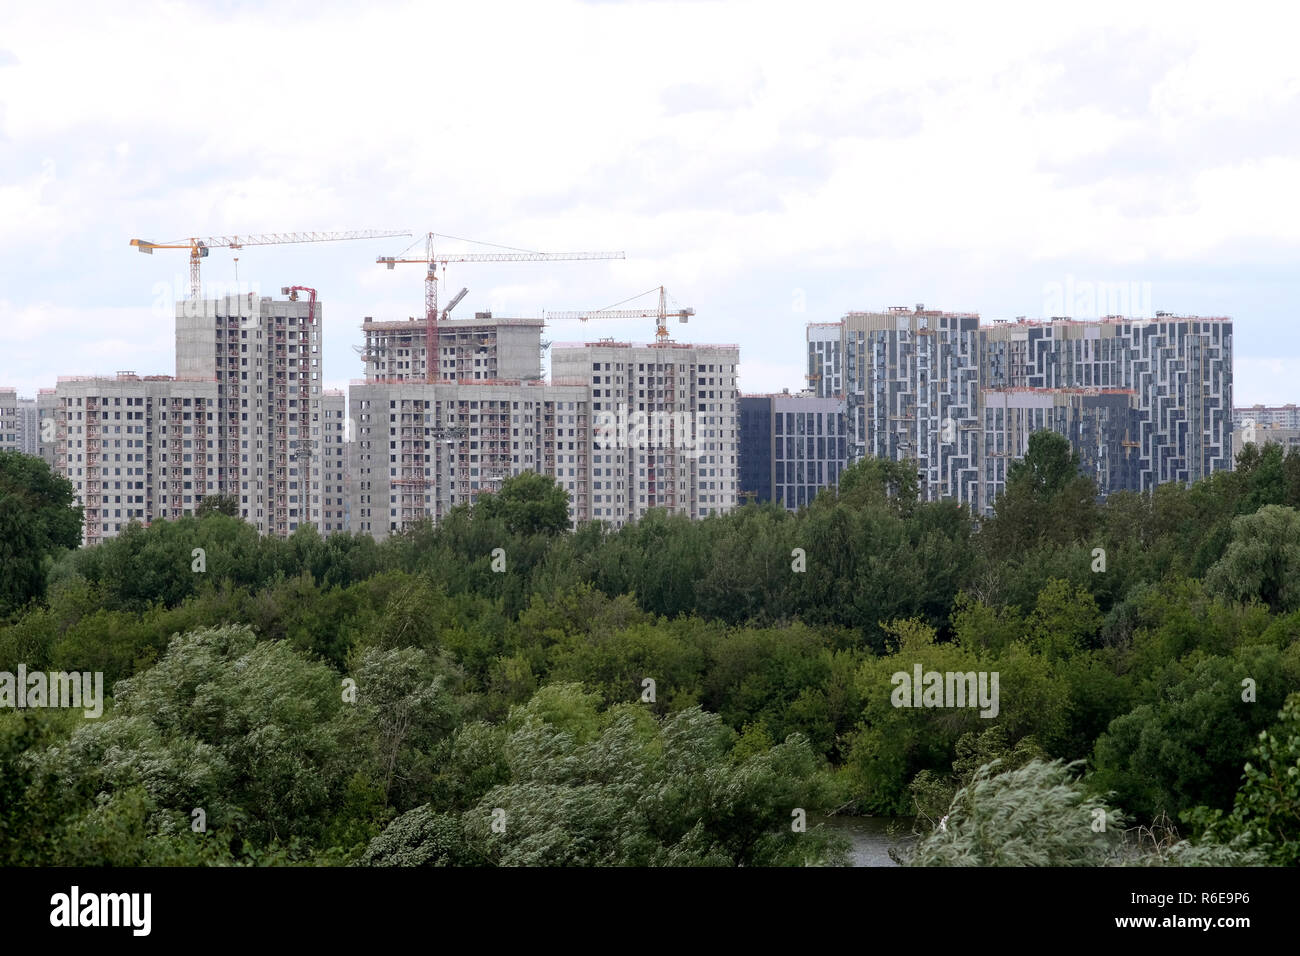 City construction. Landscape with cranes and new block of flats construction in new green ecological district sky with white clouds in summer day Stock Photo